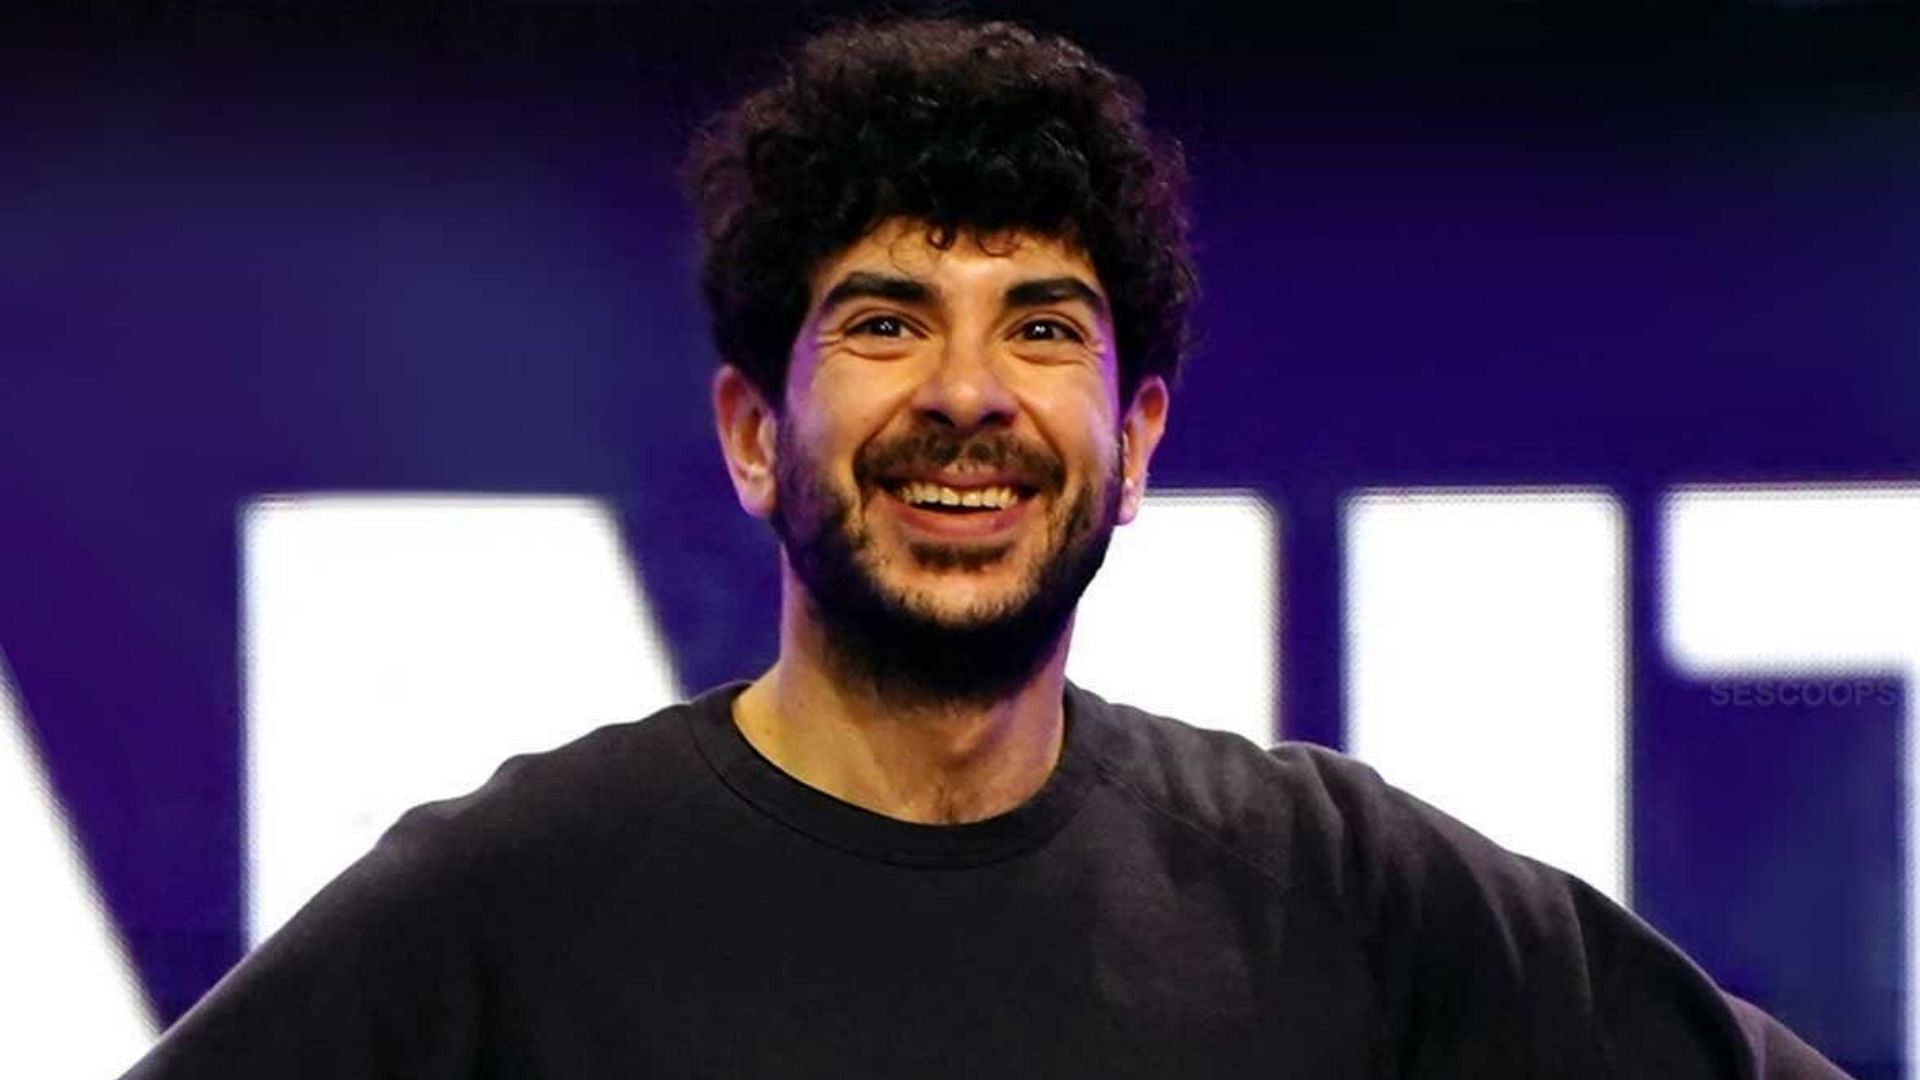 Tony Khan at an AEW event in 2022